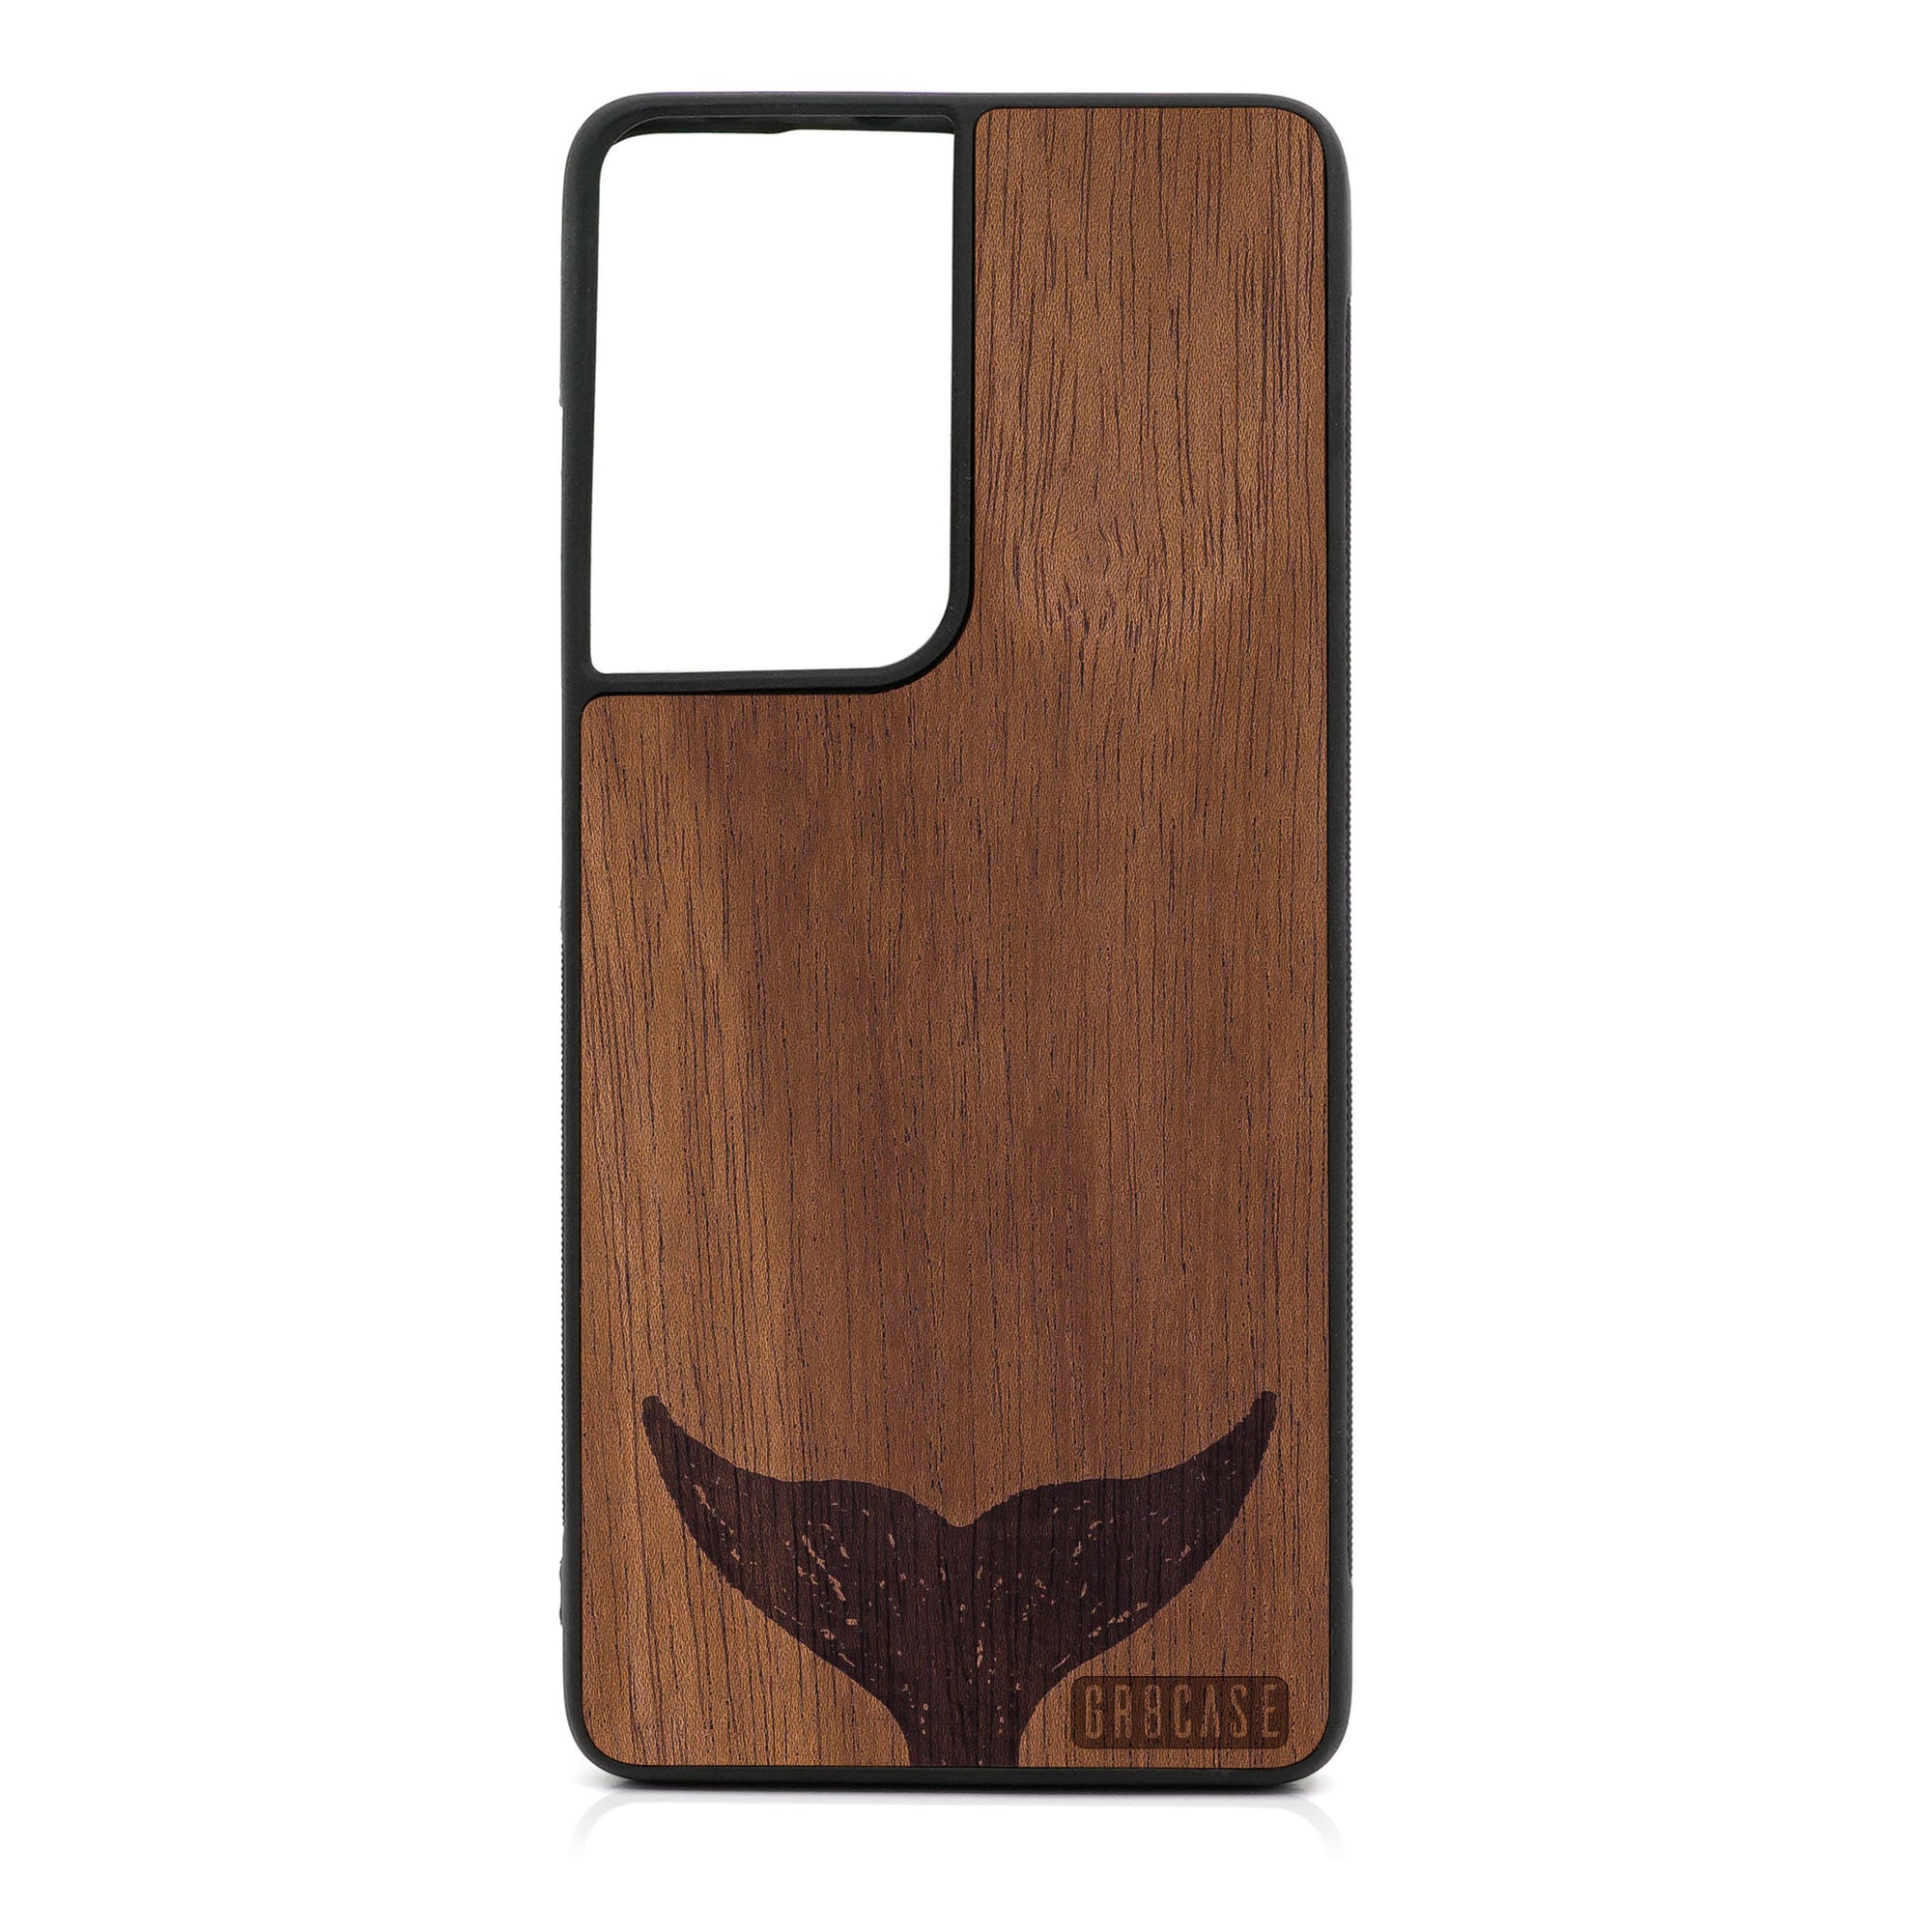 Whale Tail Design Wood Case For Samsung Galaxy S21 Ultra 5G